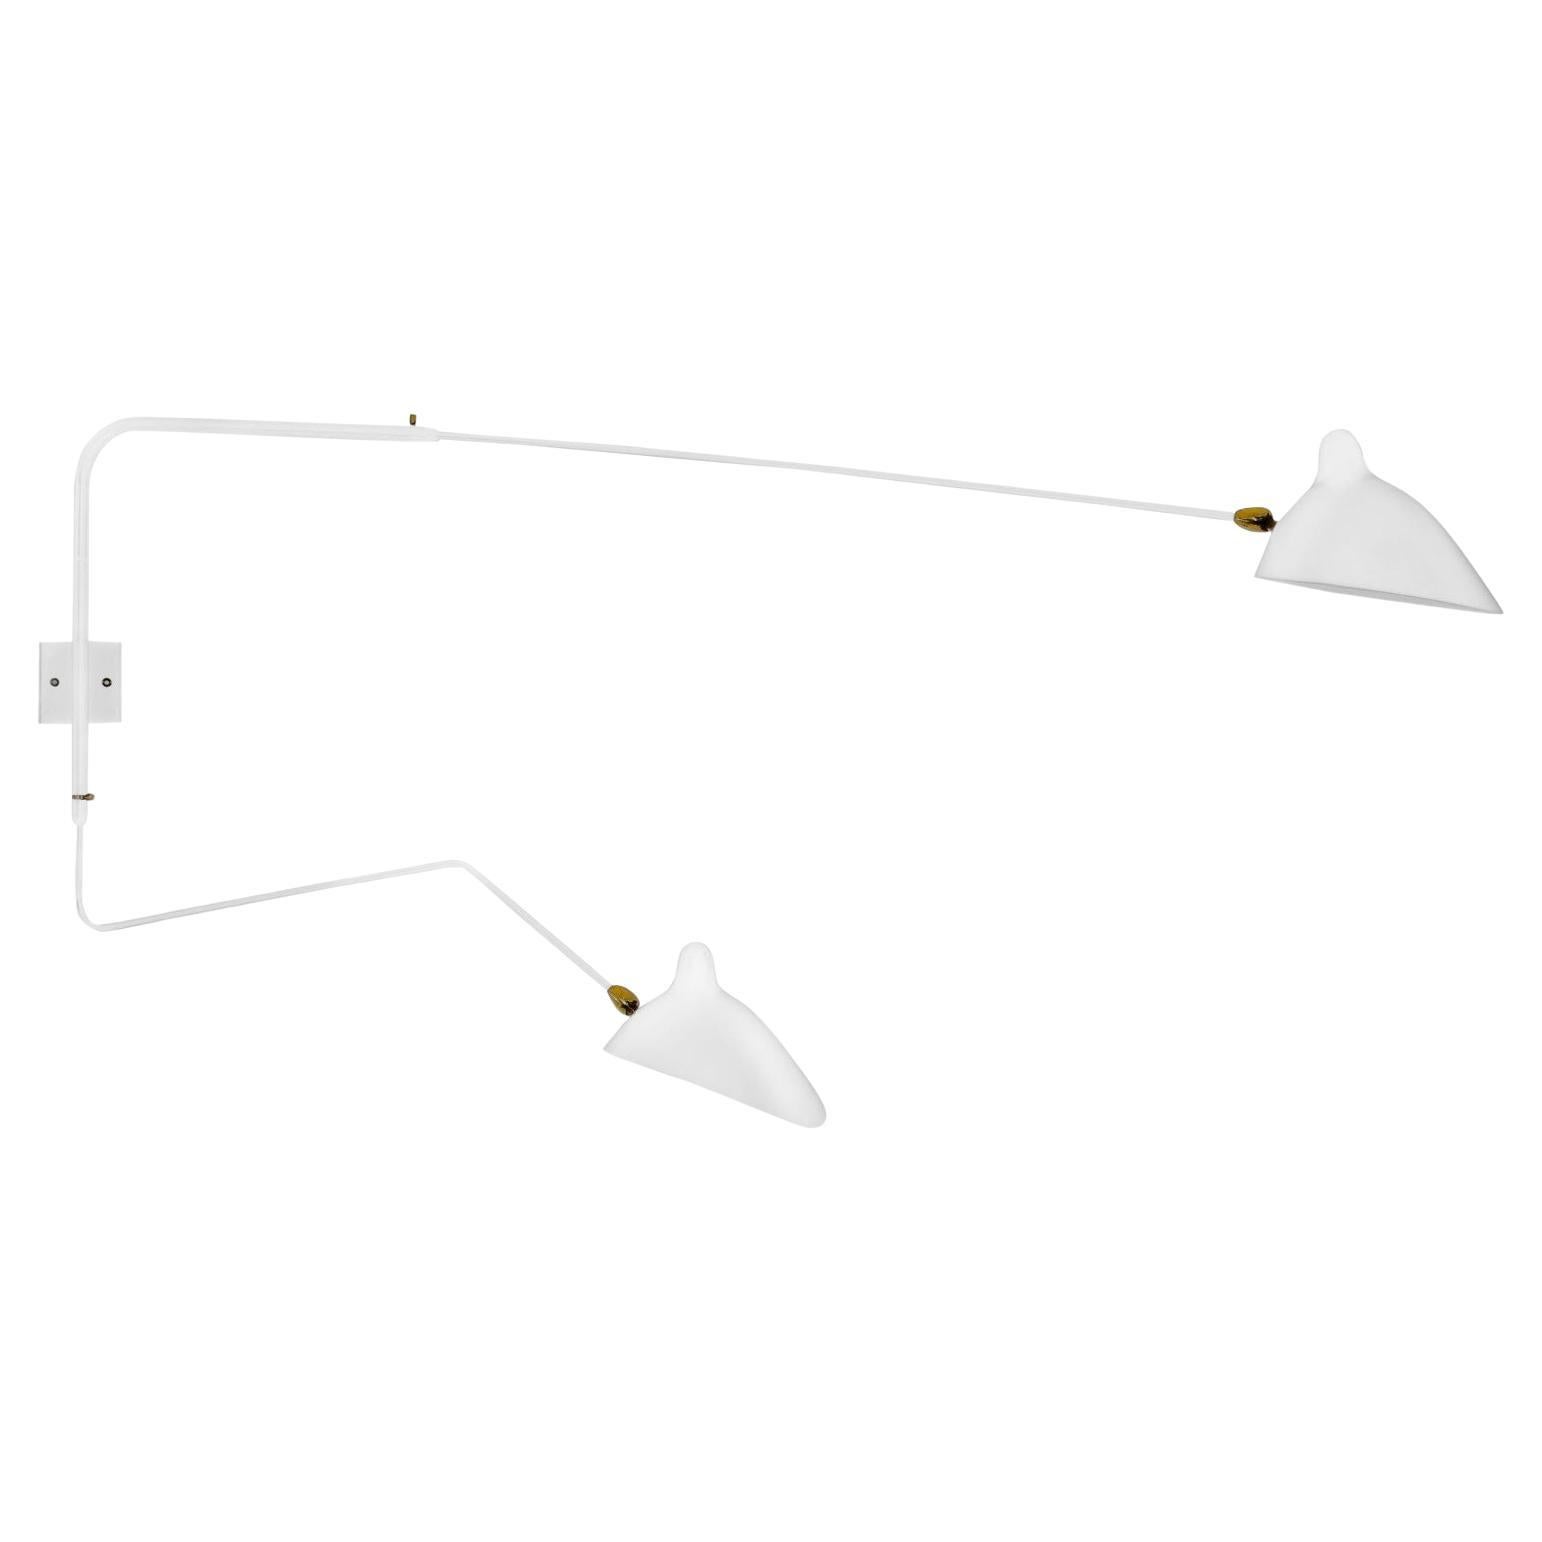 Serge Mouille - Rotating Sconce with 2 Arms (1 Curved) in White For Sale